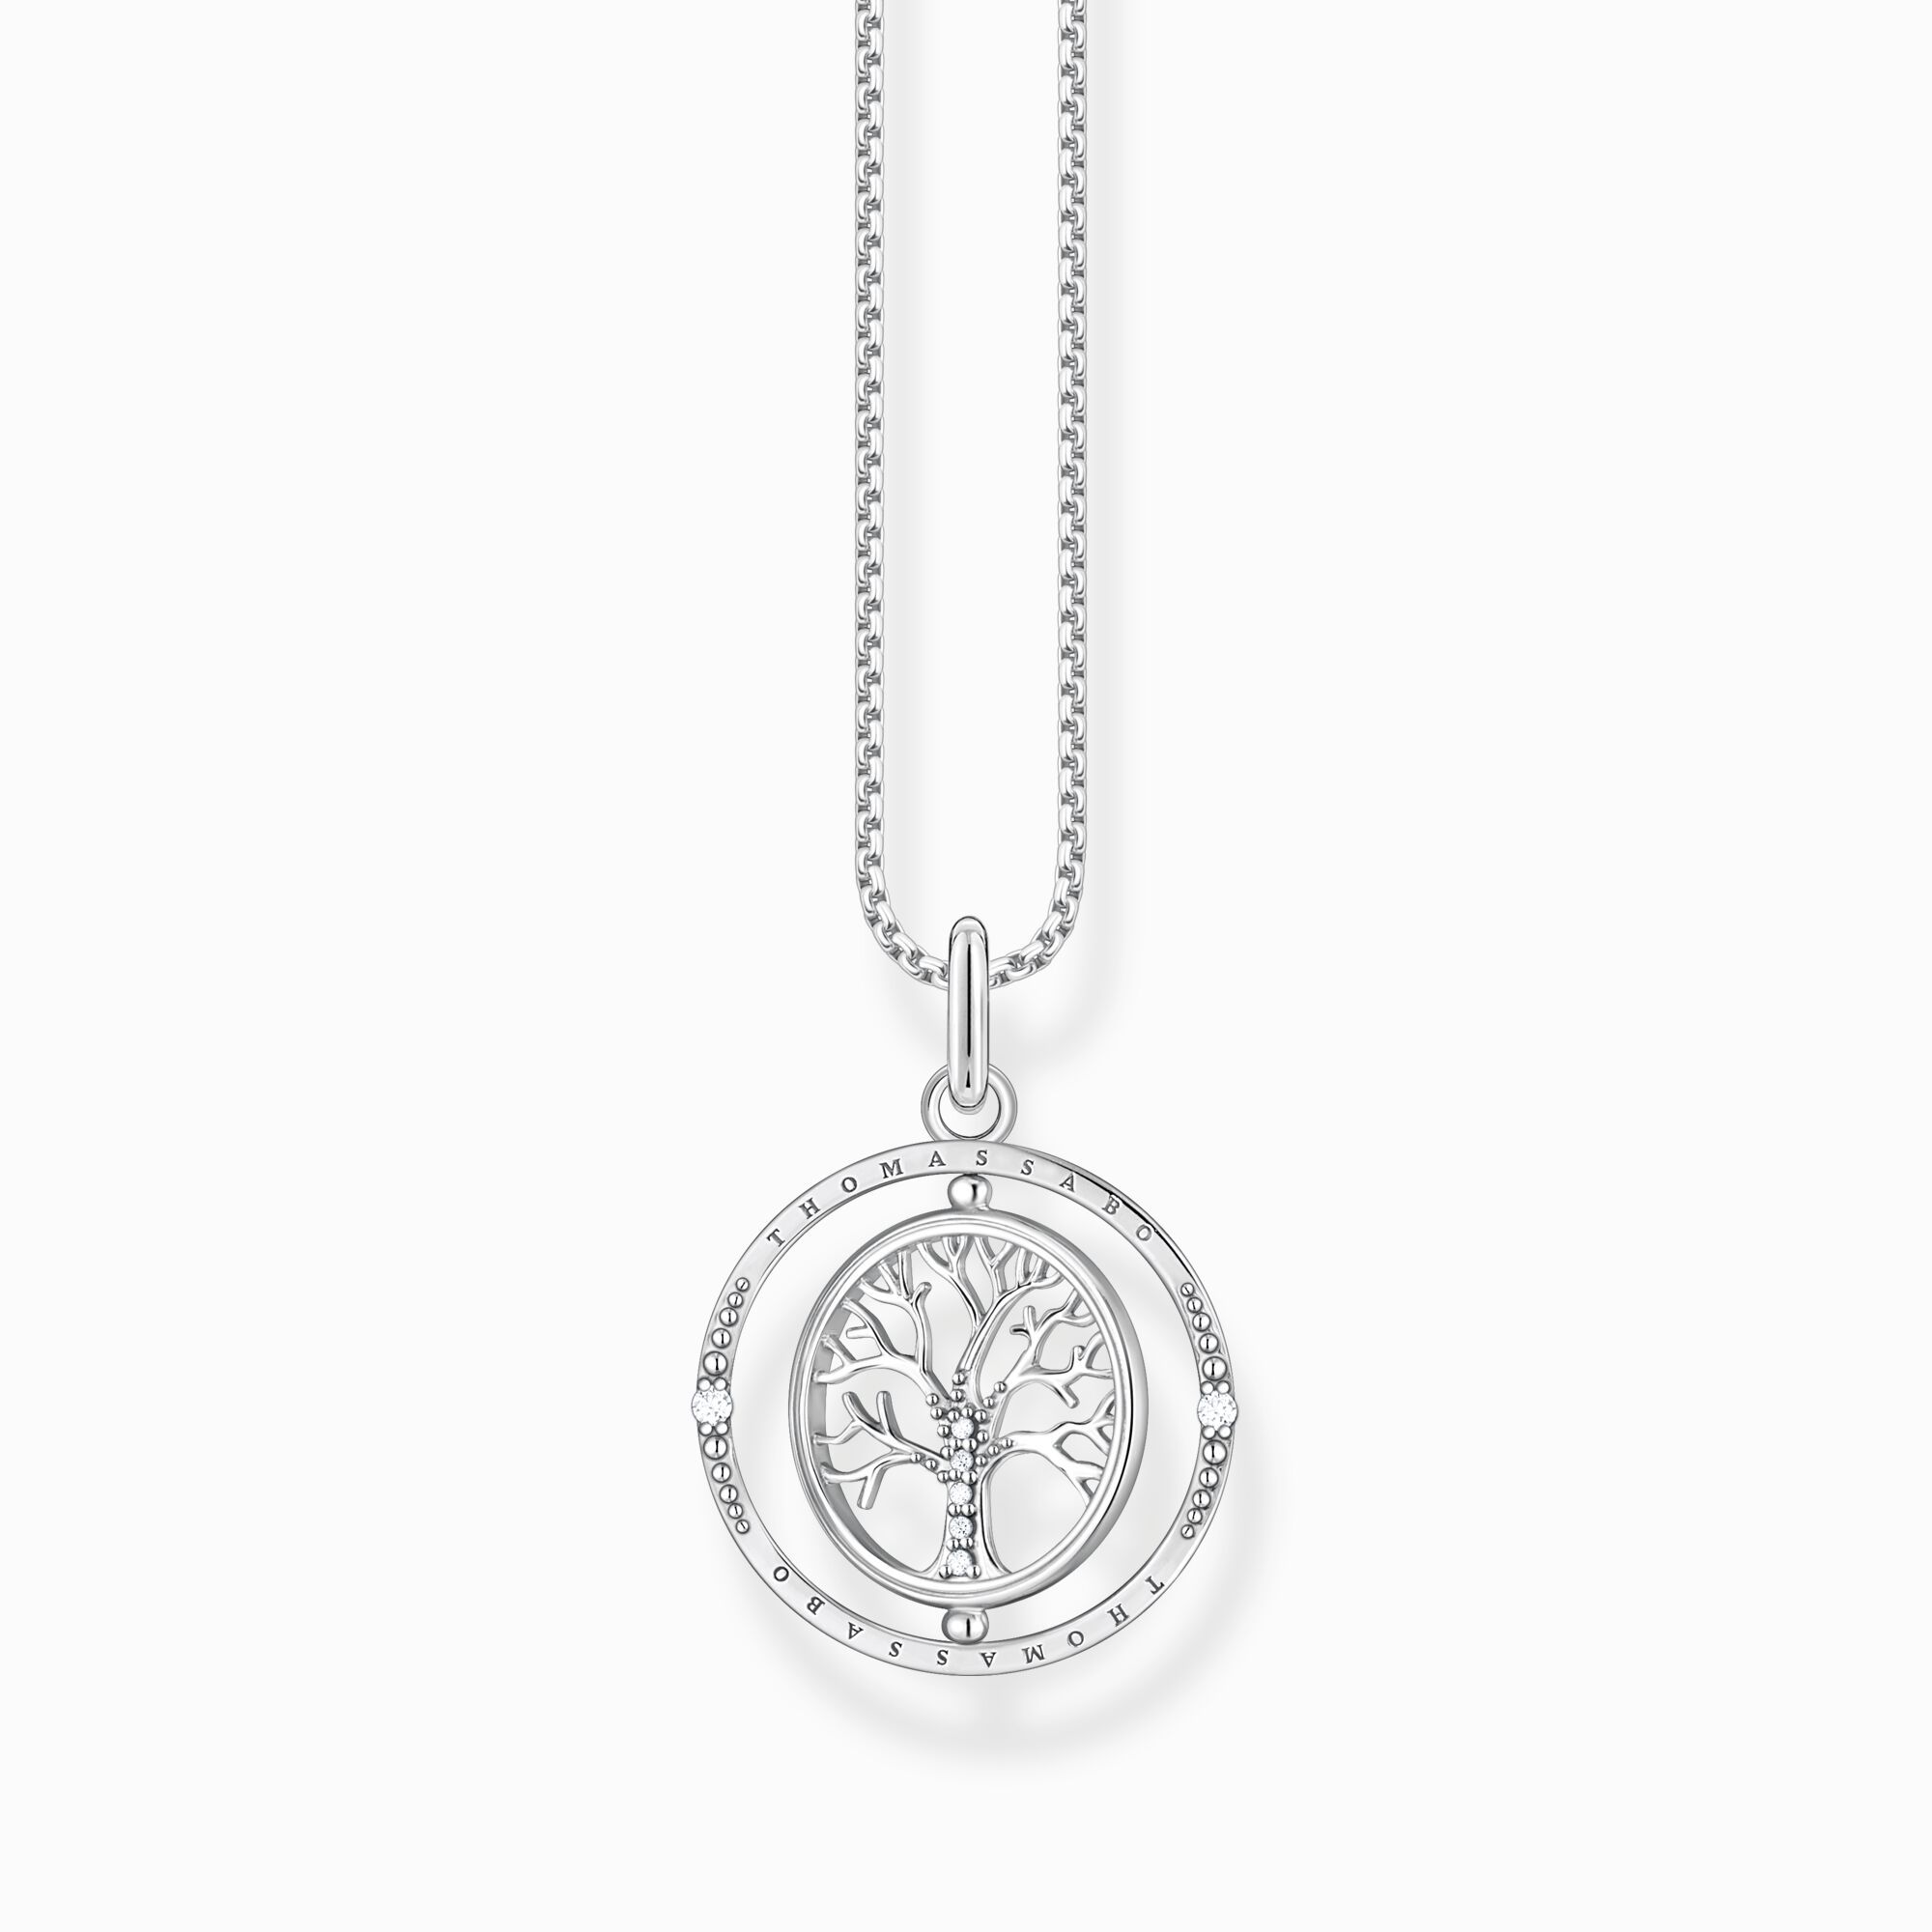 SABO silver Necklace – Tree with THOMAS pendant: Love, of